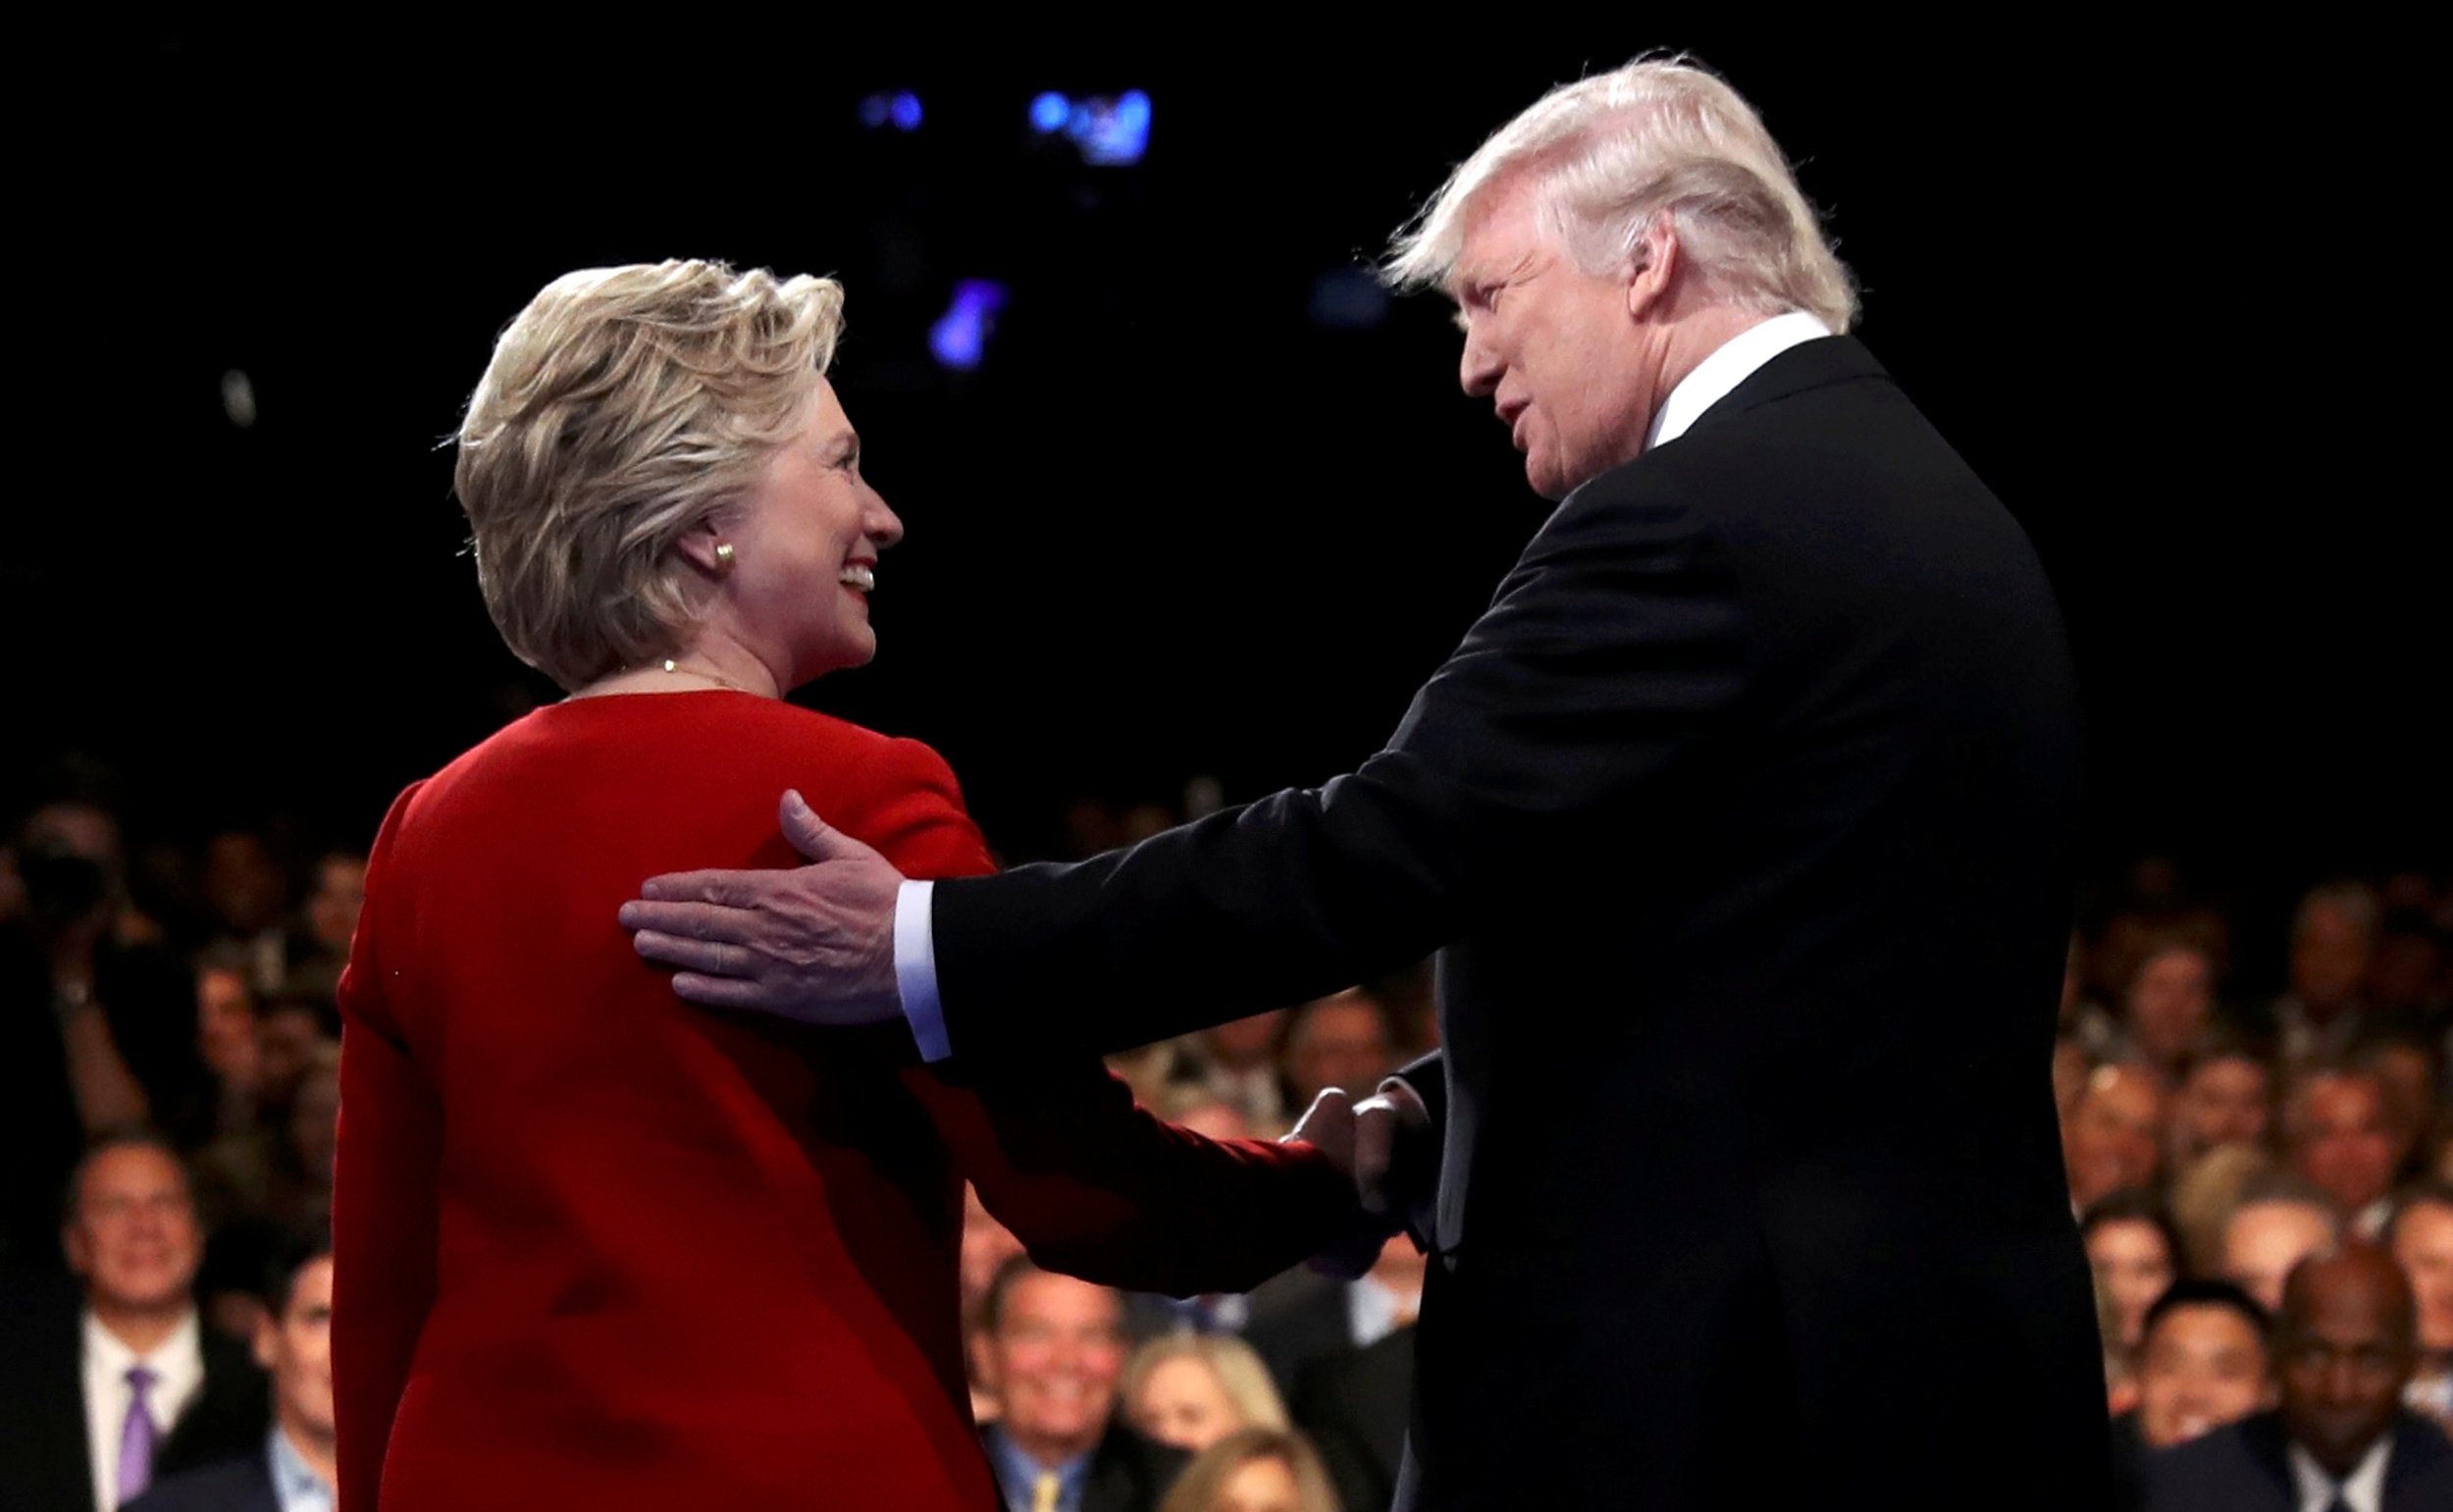 Hillary Clinton shakes hands with Donald Trump 